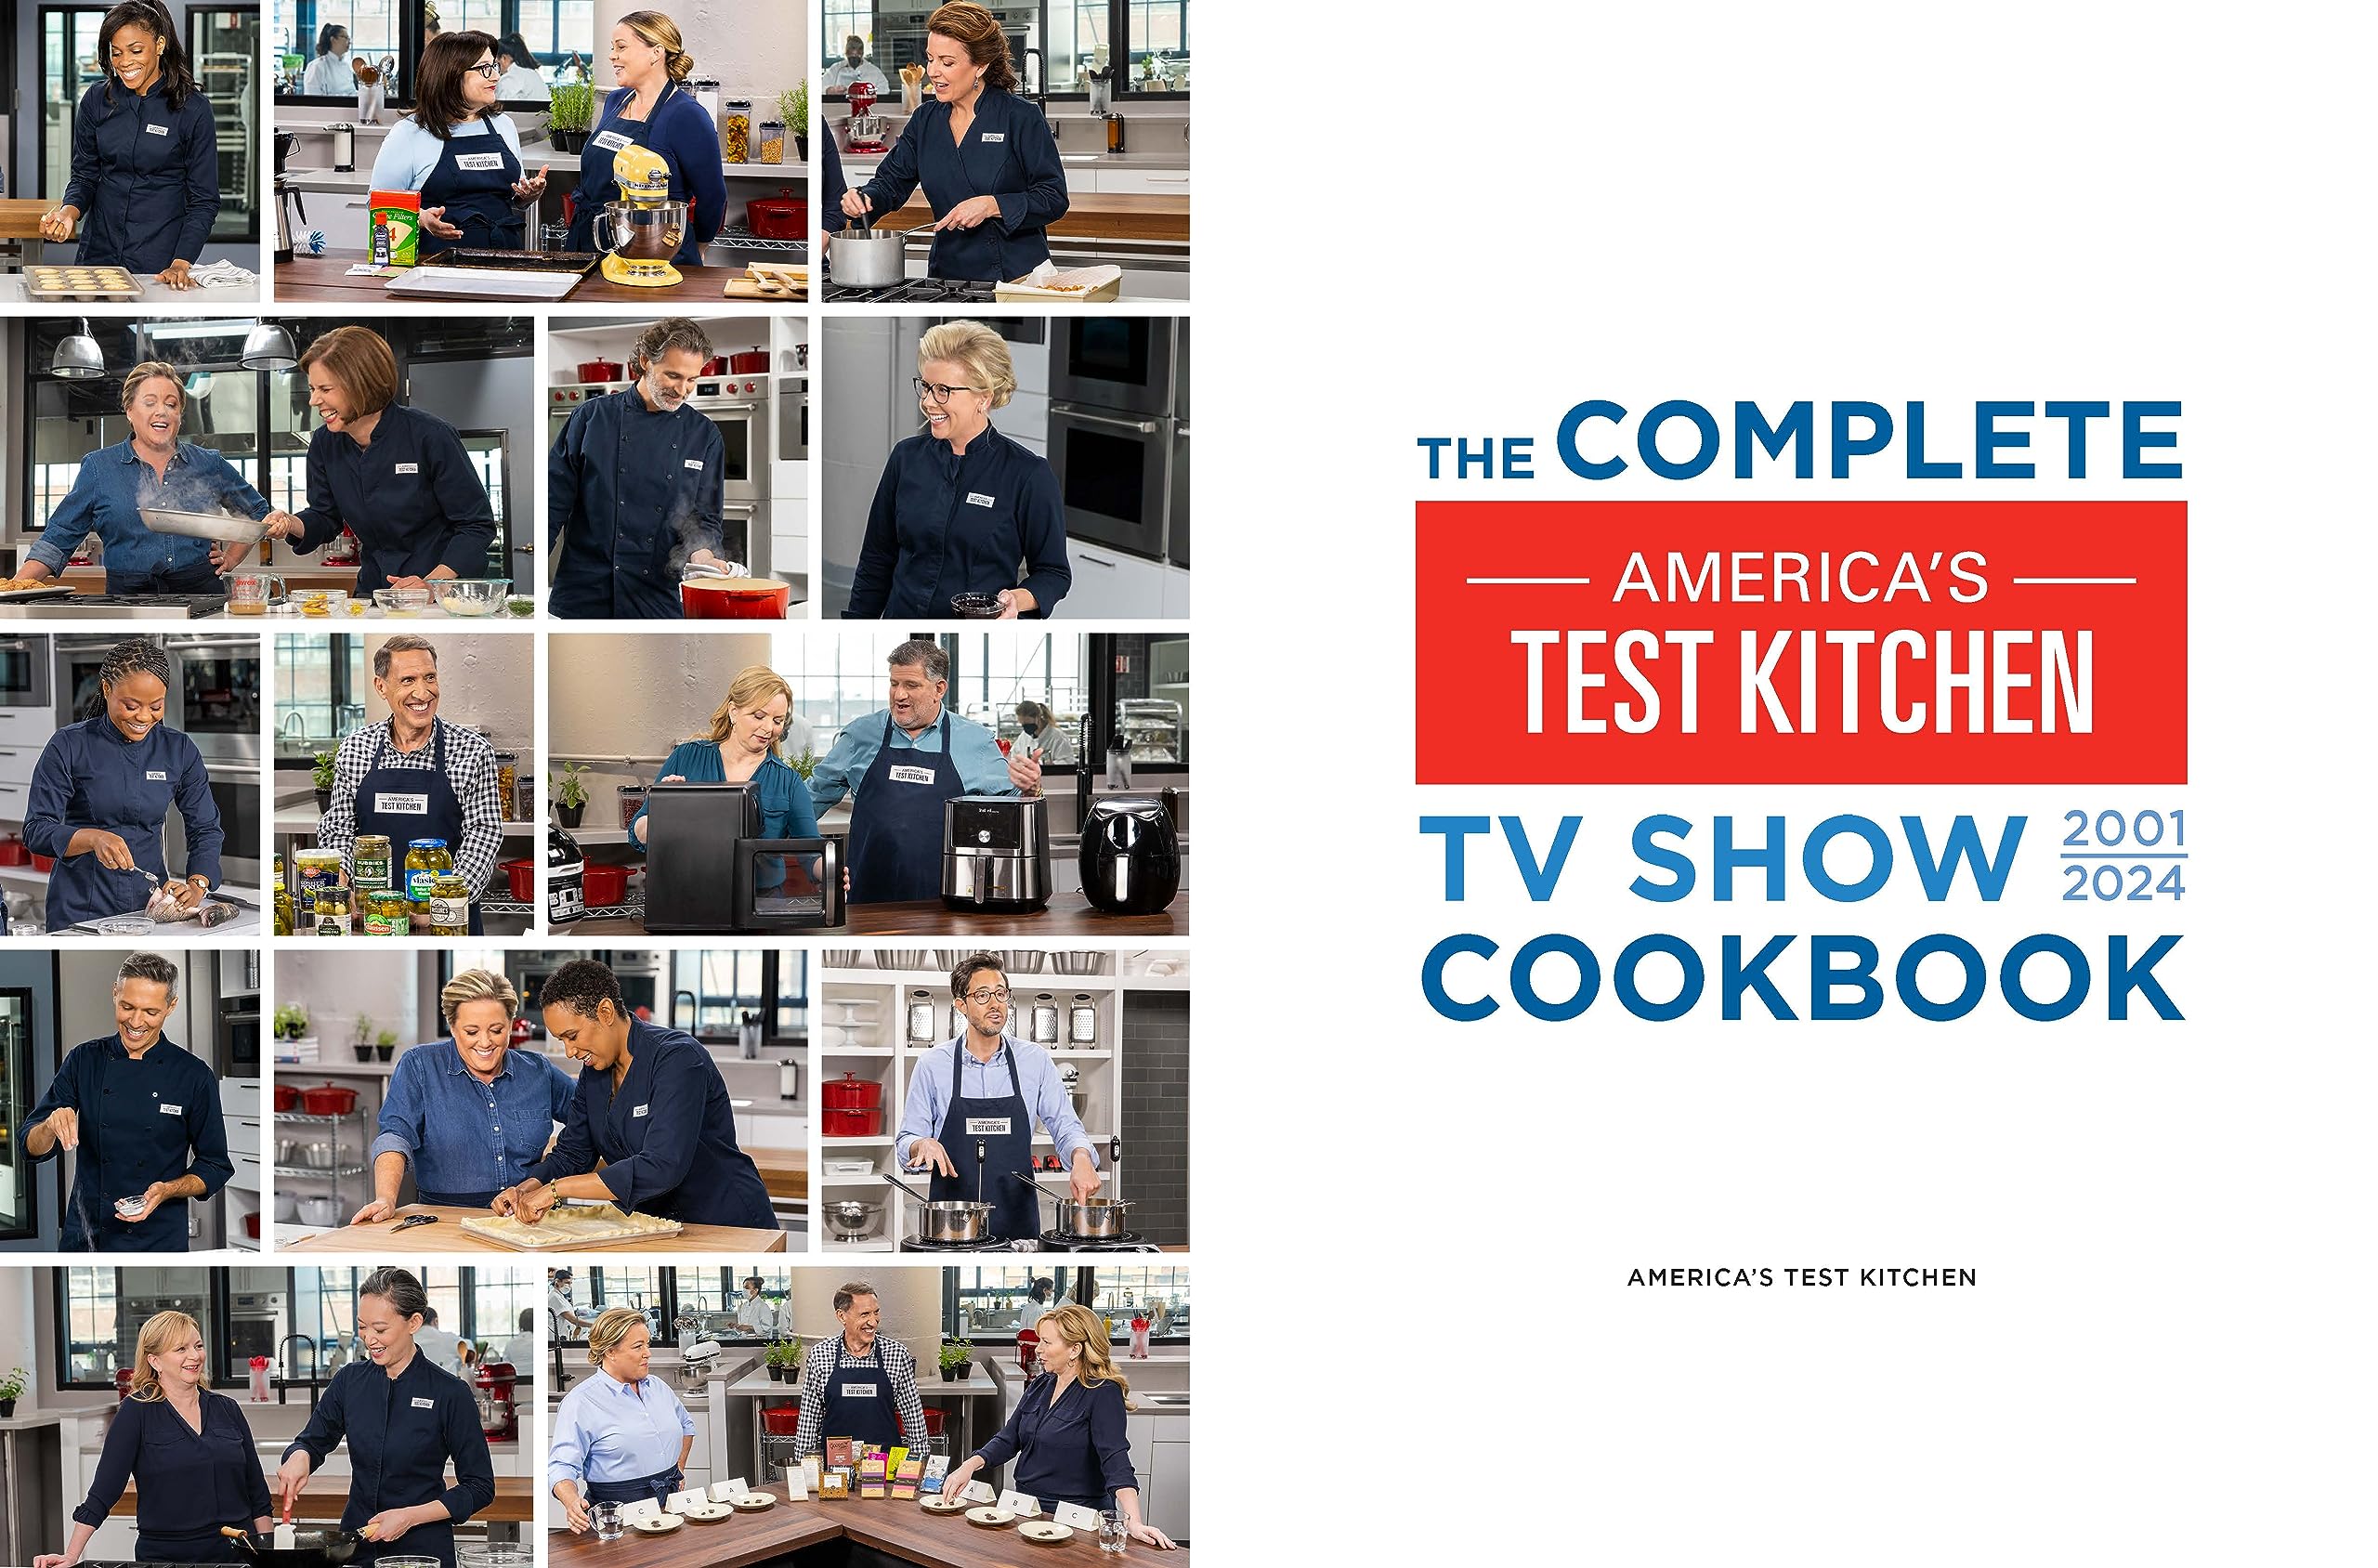 The Complete America’s Test Kitchen TV Show Cookbook 2001–2024: Every Recipe from the Hit TV Show Along with Product Ratings Includes the 2024 Season